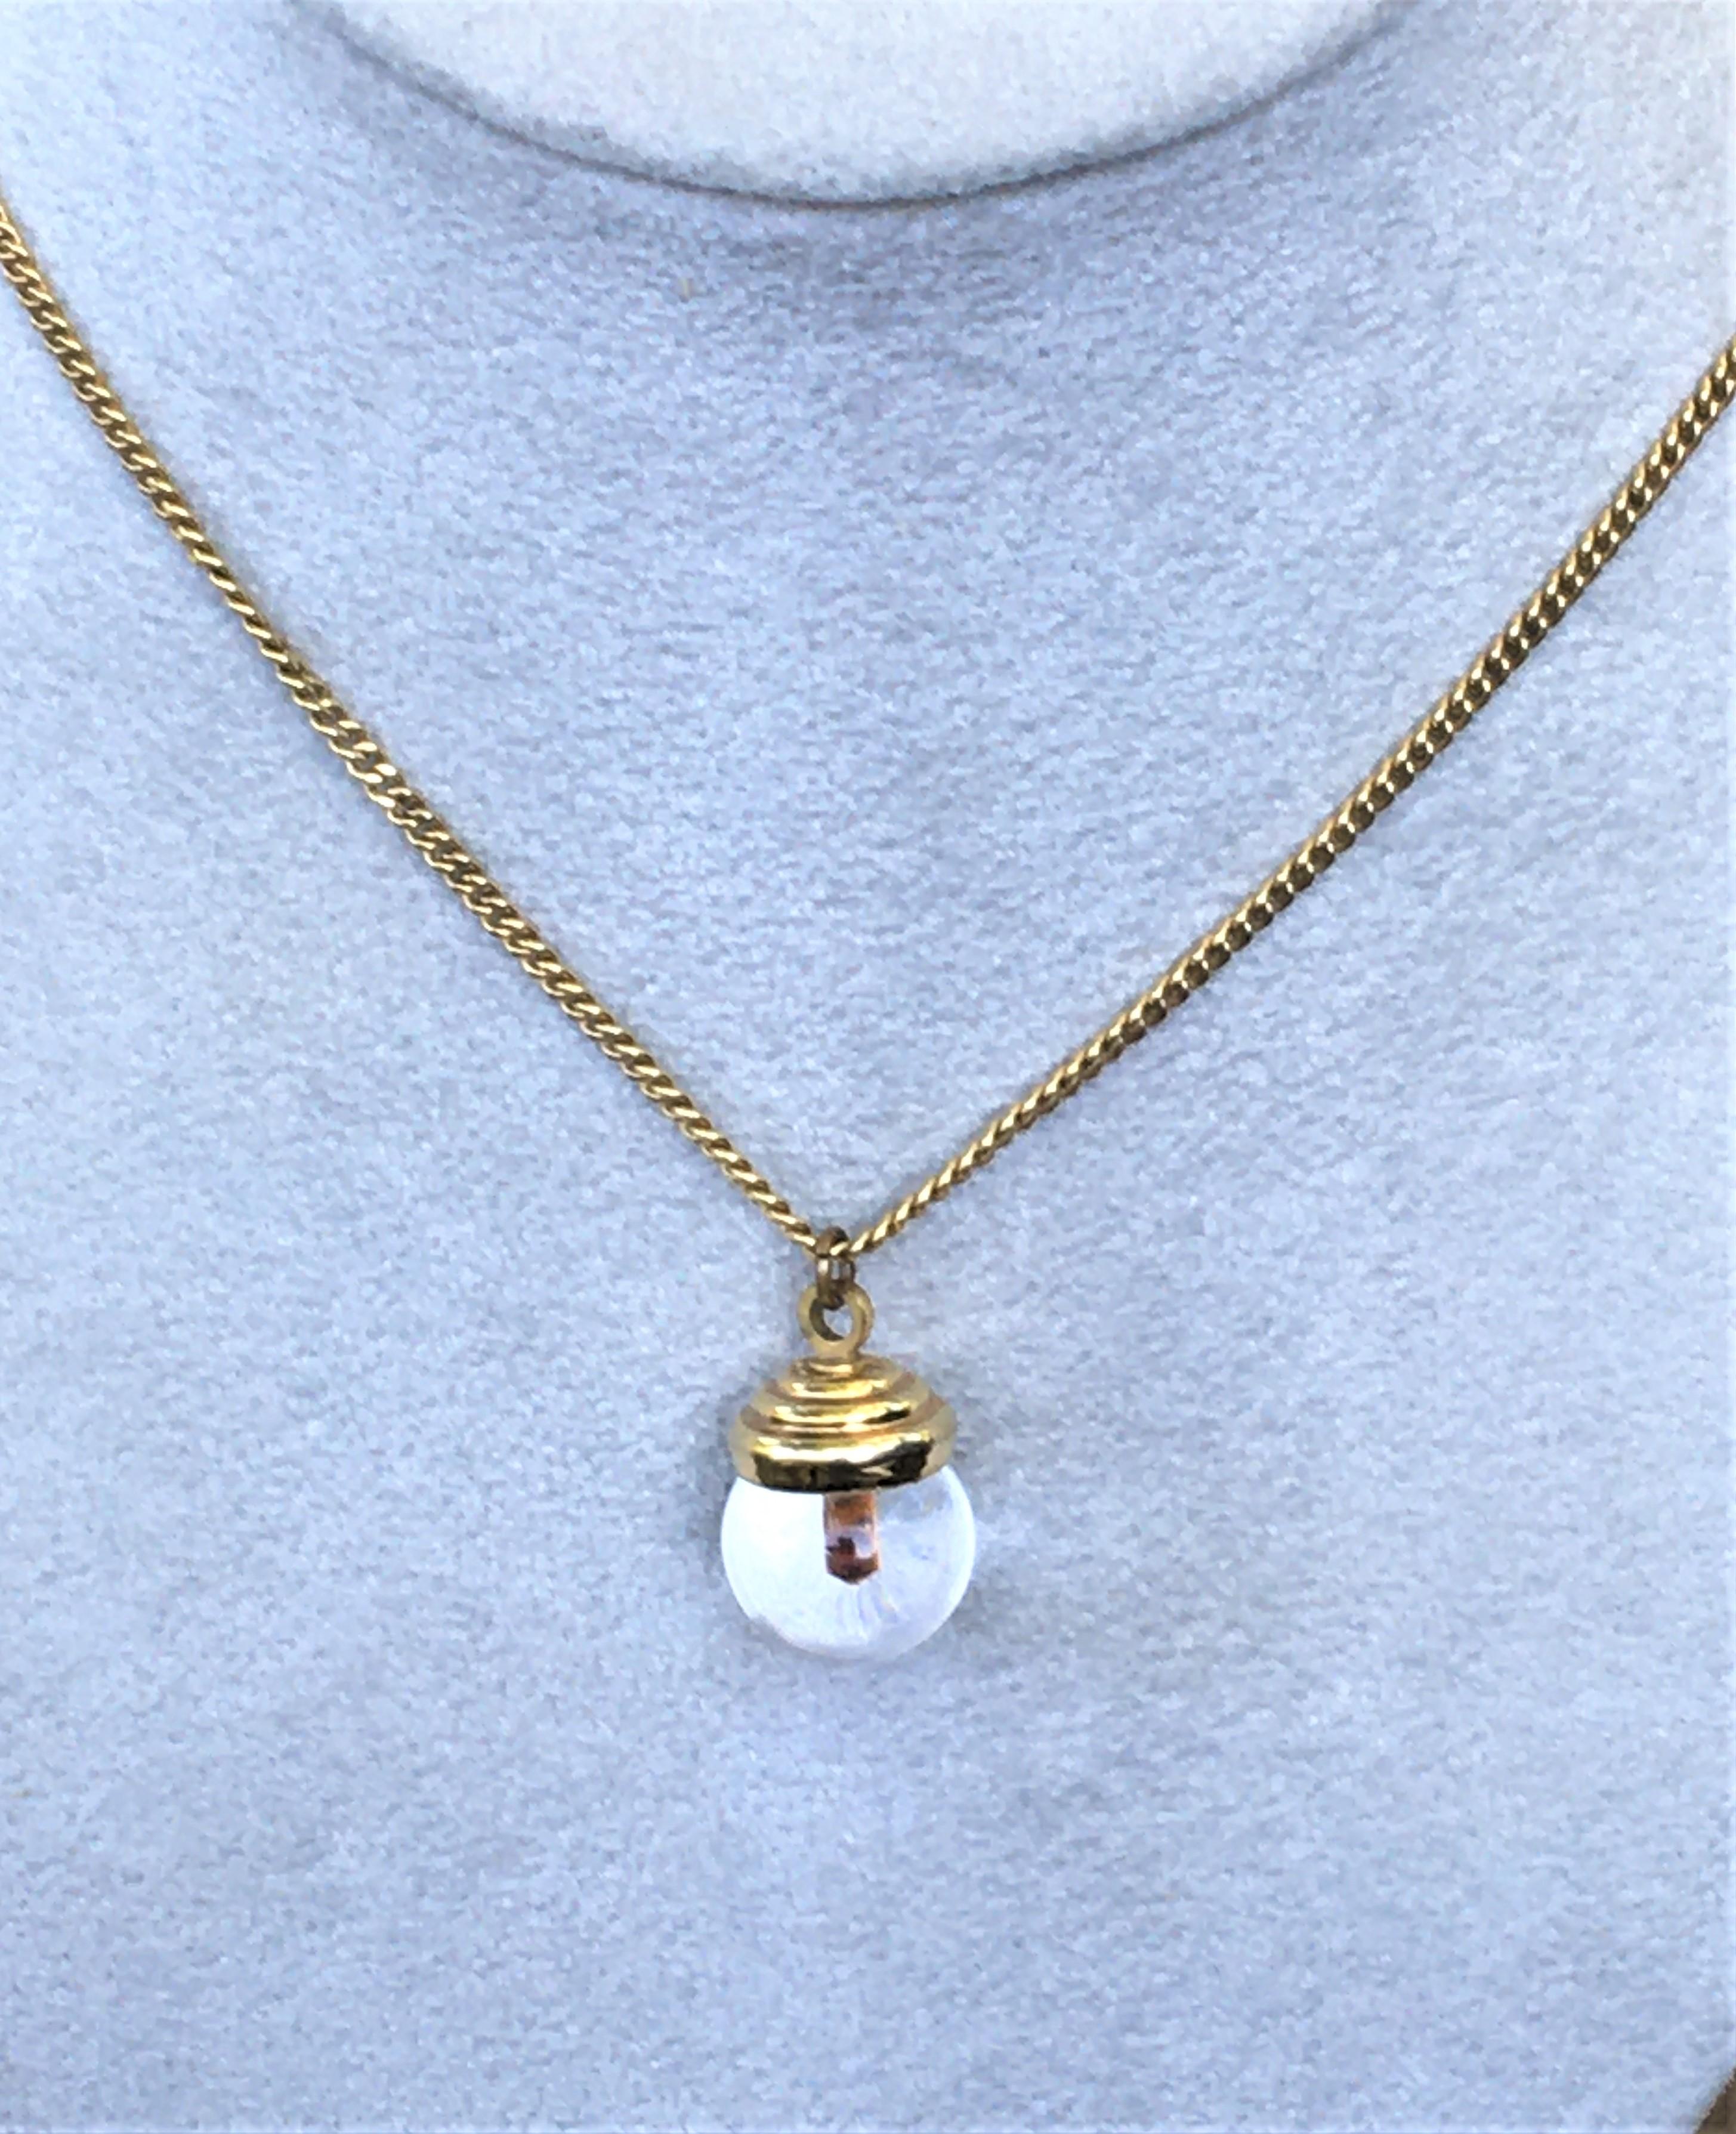 The mustard seed is referred to in the Bible as a symbol of faith and hope.  This estate necklace is a wonderful gift for anyone (including yourself!).
18 inch curb chain
Flint glass  'fish bowl' with mustard seed, approximately 12.5mm wide
Stamped